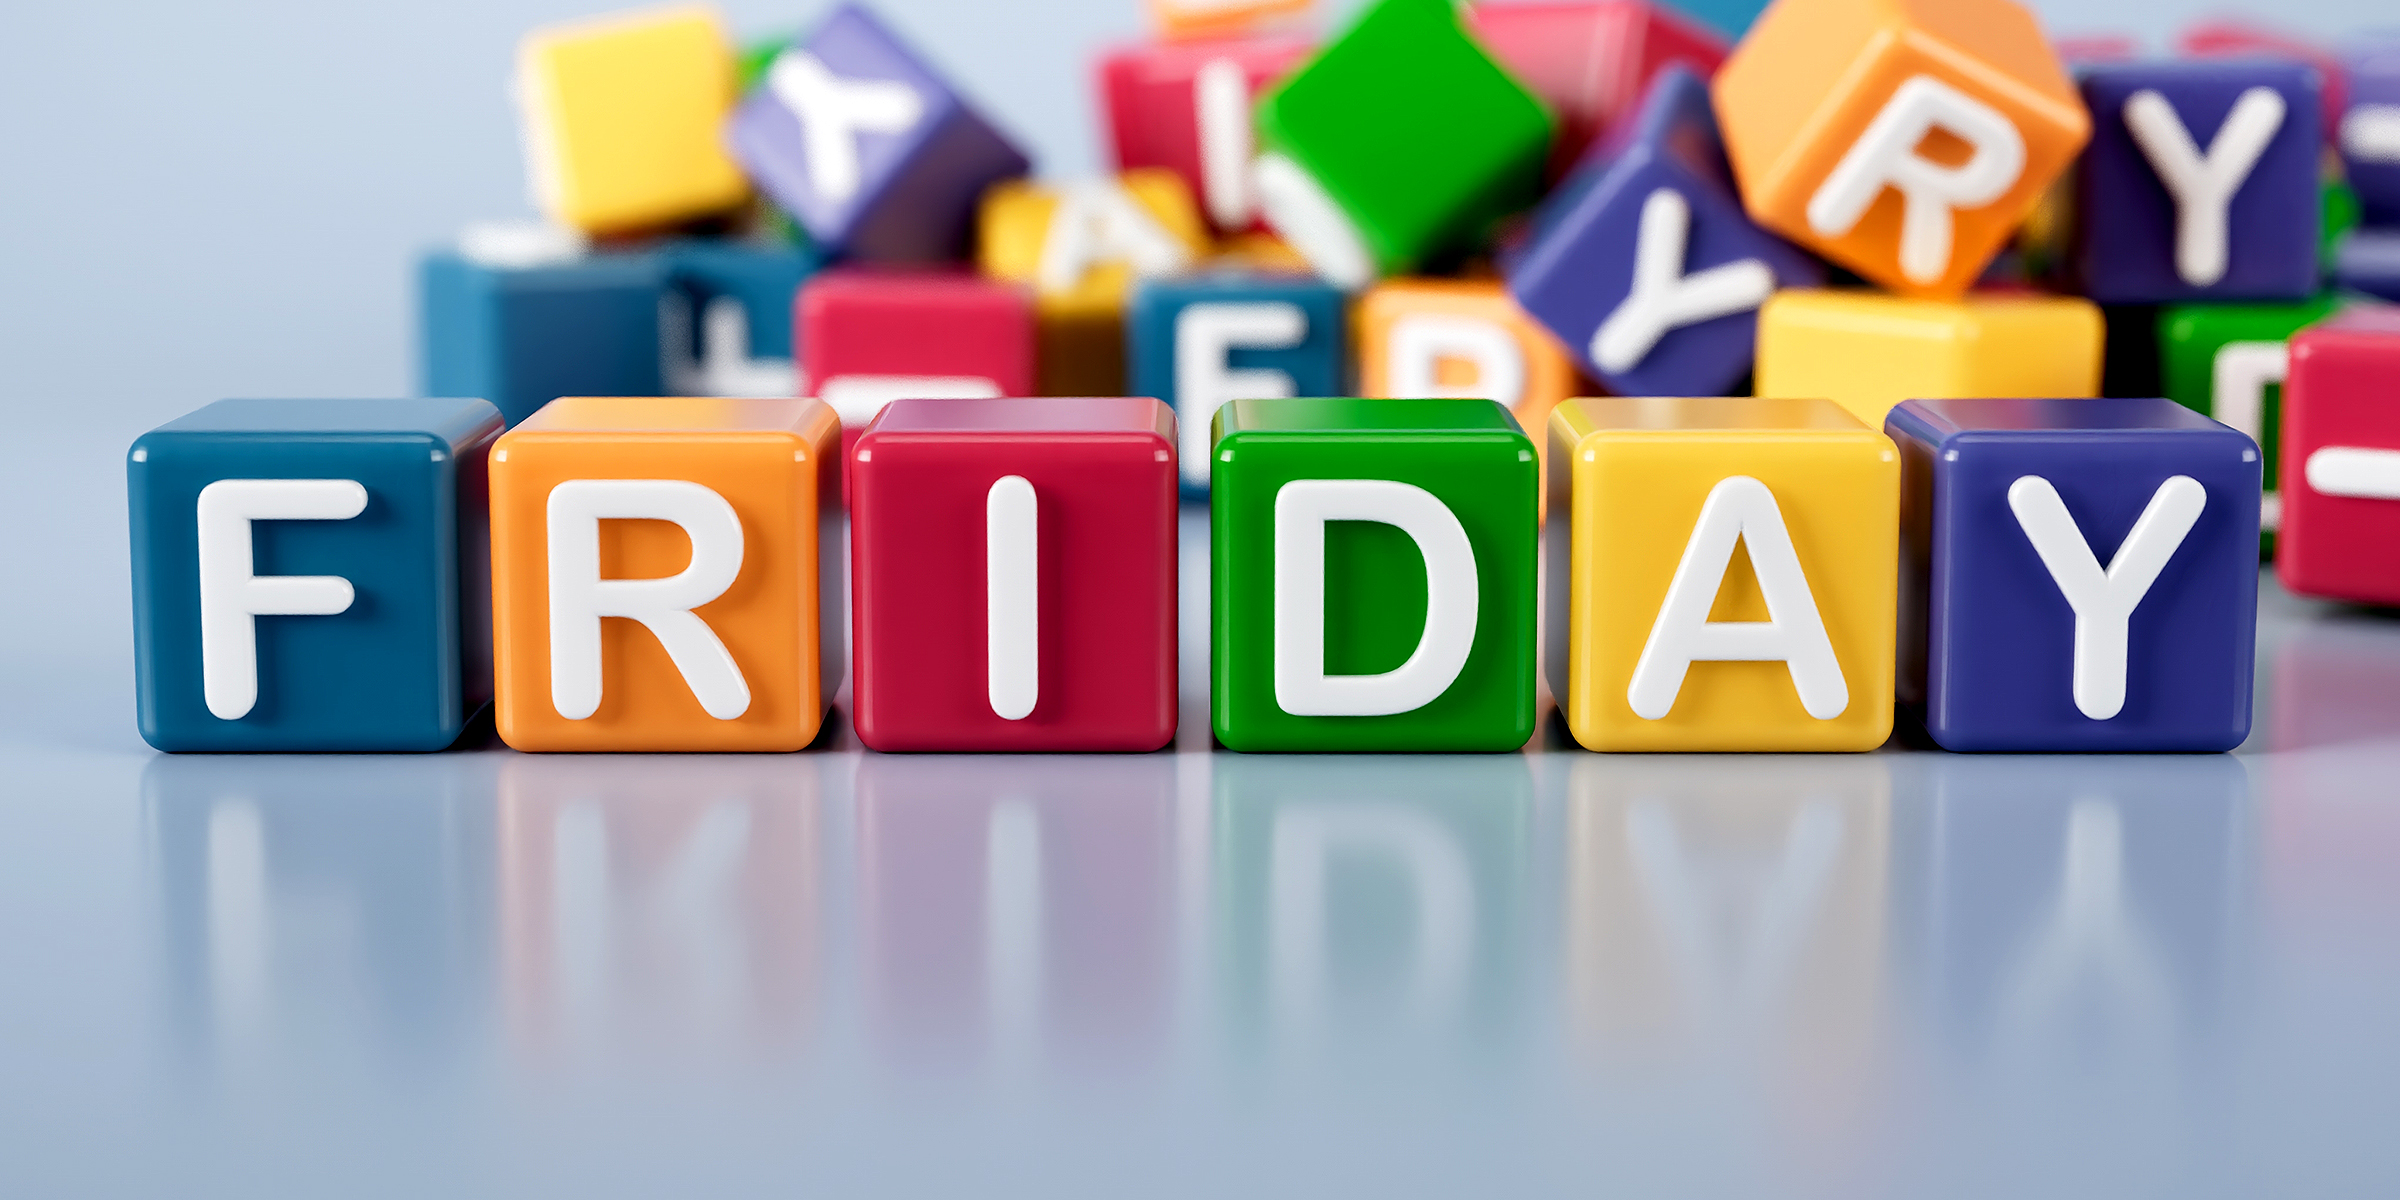 Friday inscription made from colorful cubes | Source: Shutterstock